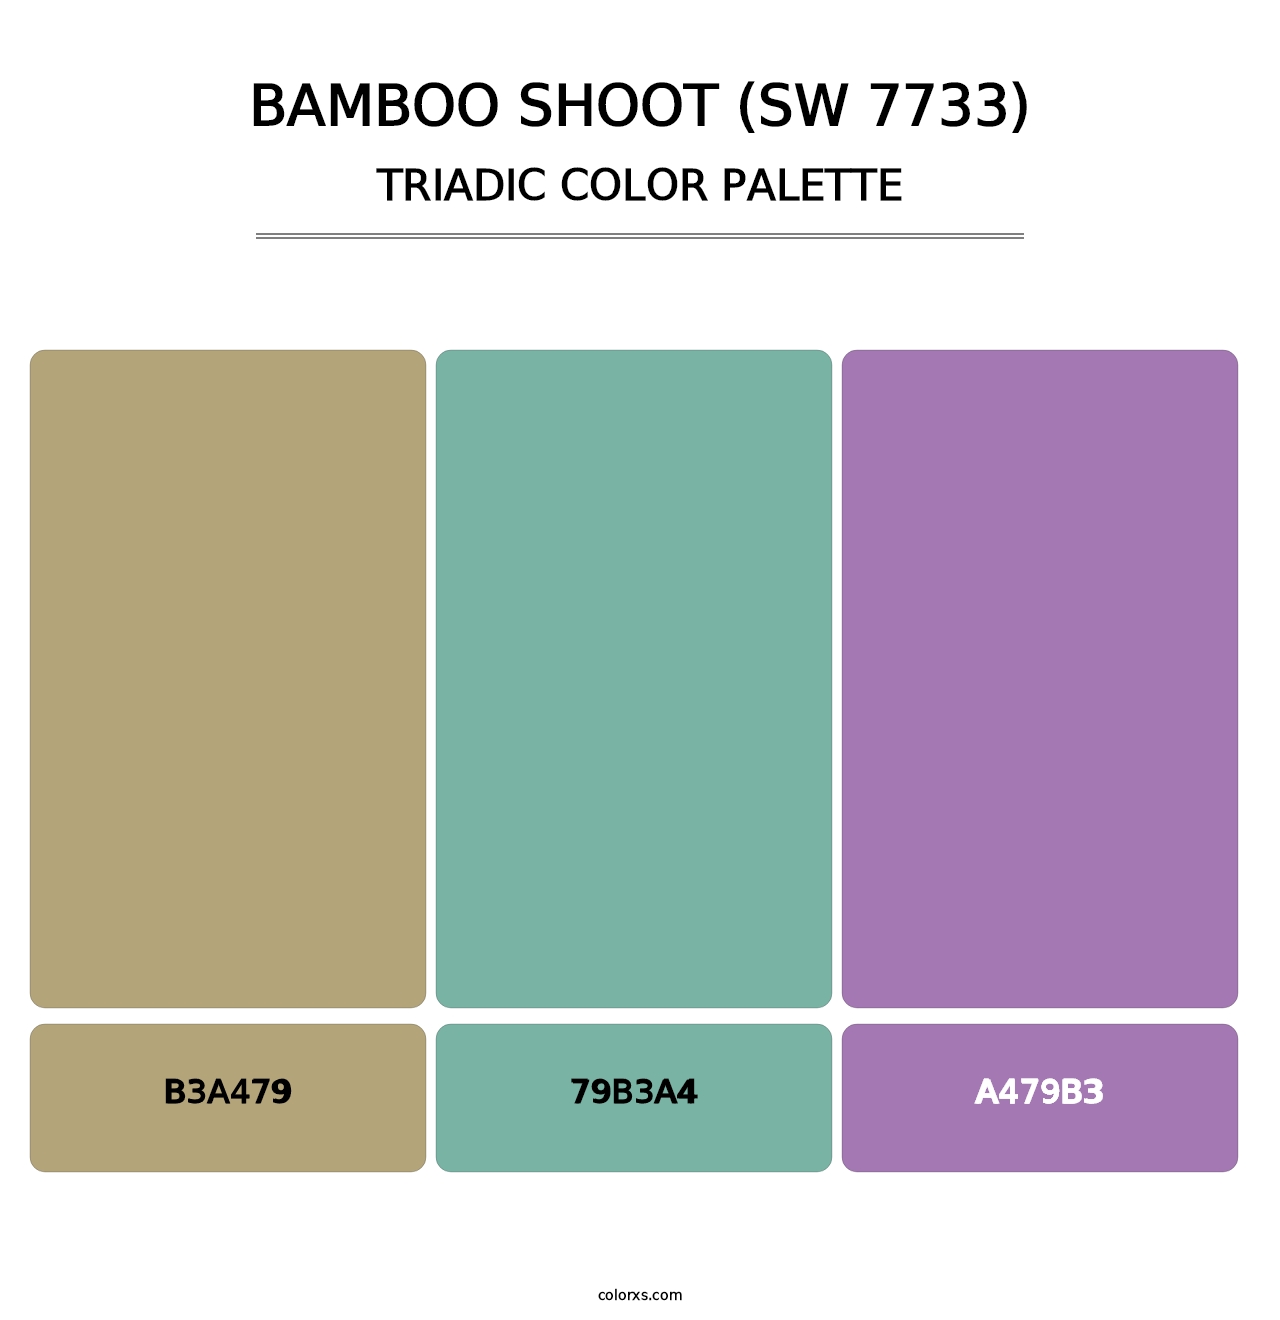 Bamboo Shoot (SW 7733) - Triadic Color Palette